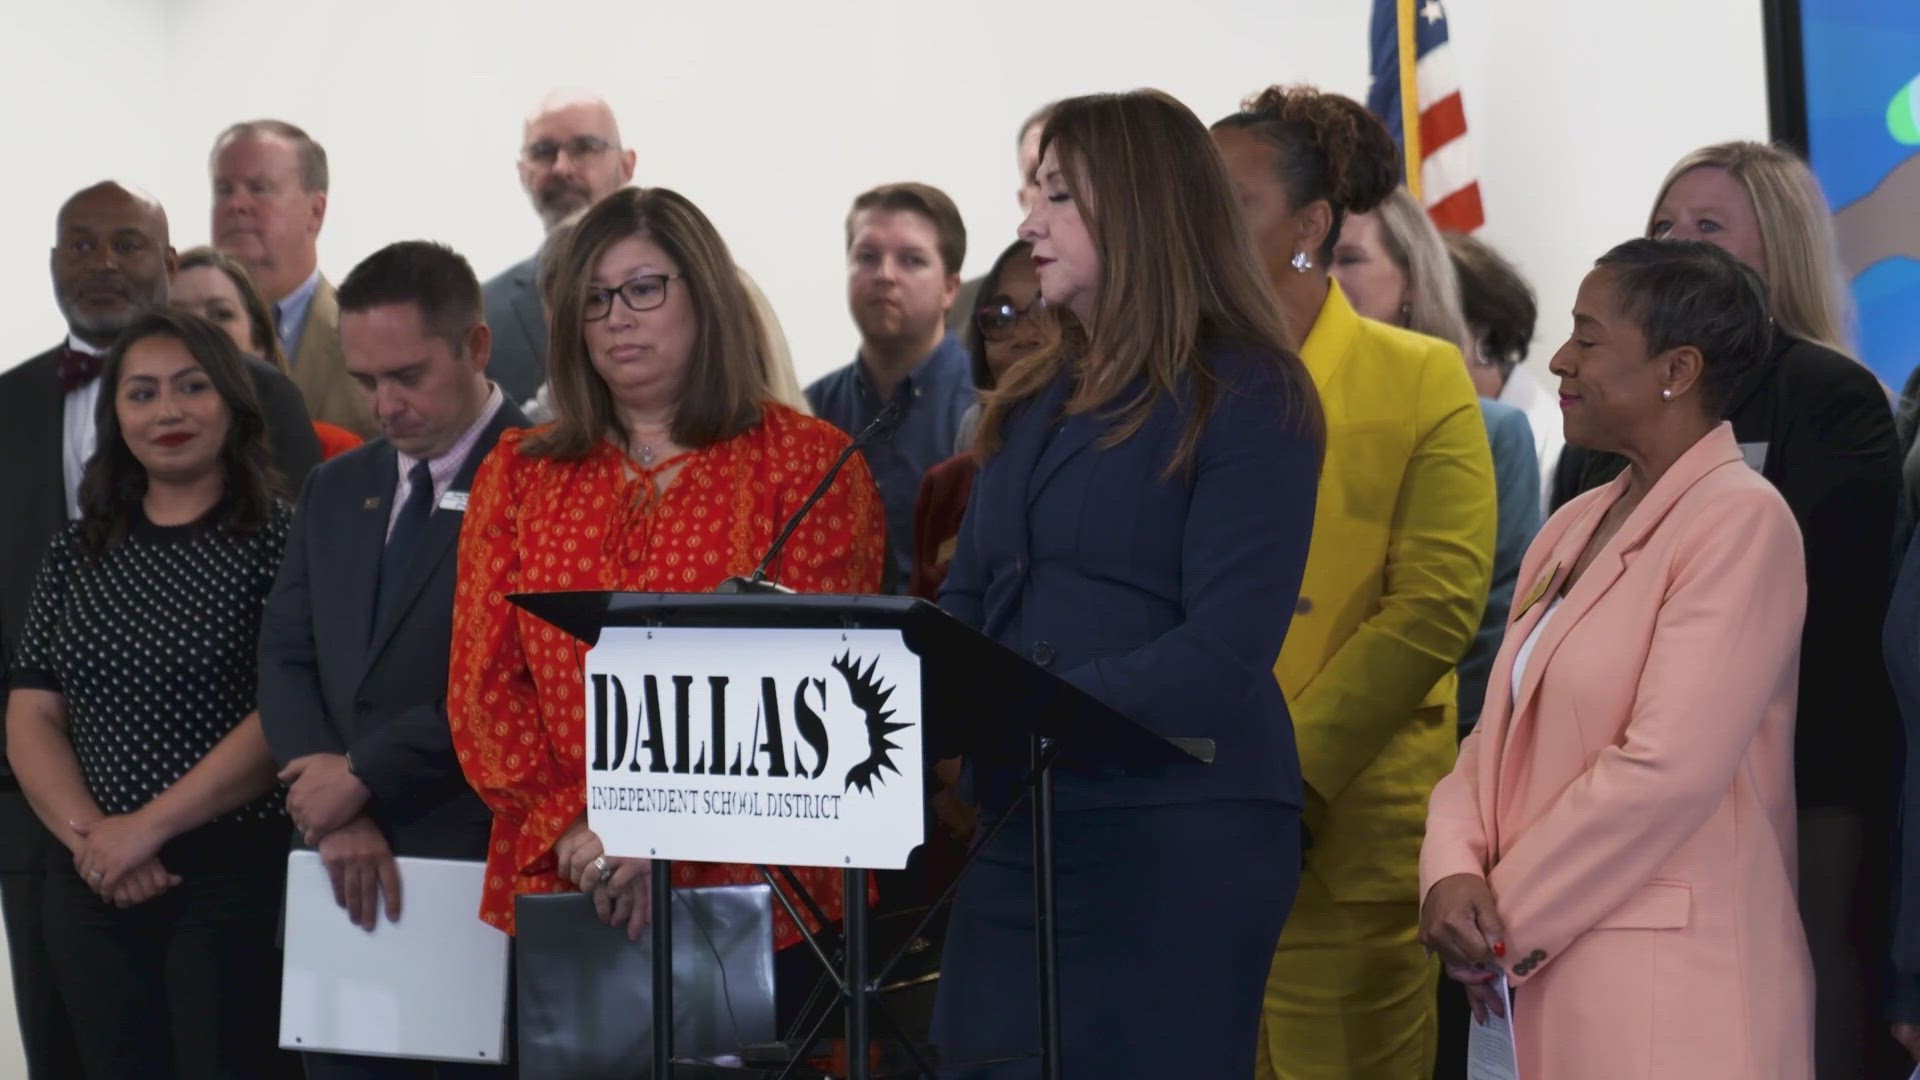 While teachers are counting down the days to the end of the 2022-2023 school year, some North Texas district leaders are gathering to focus on school funding.